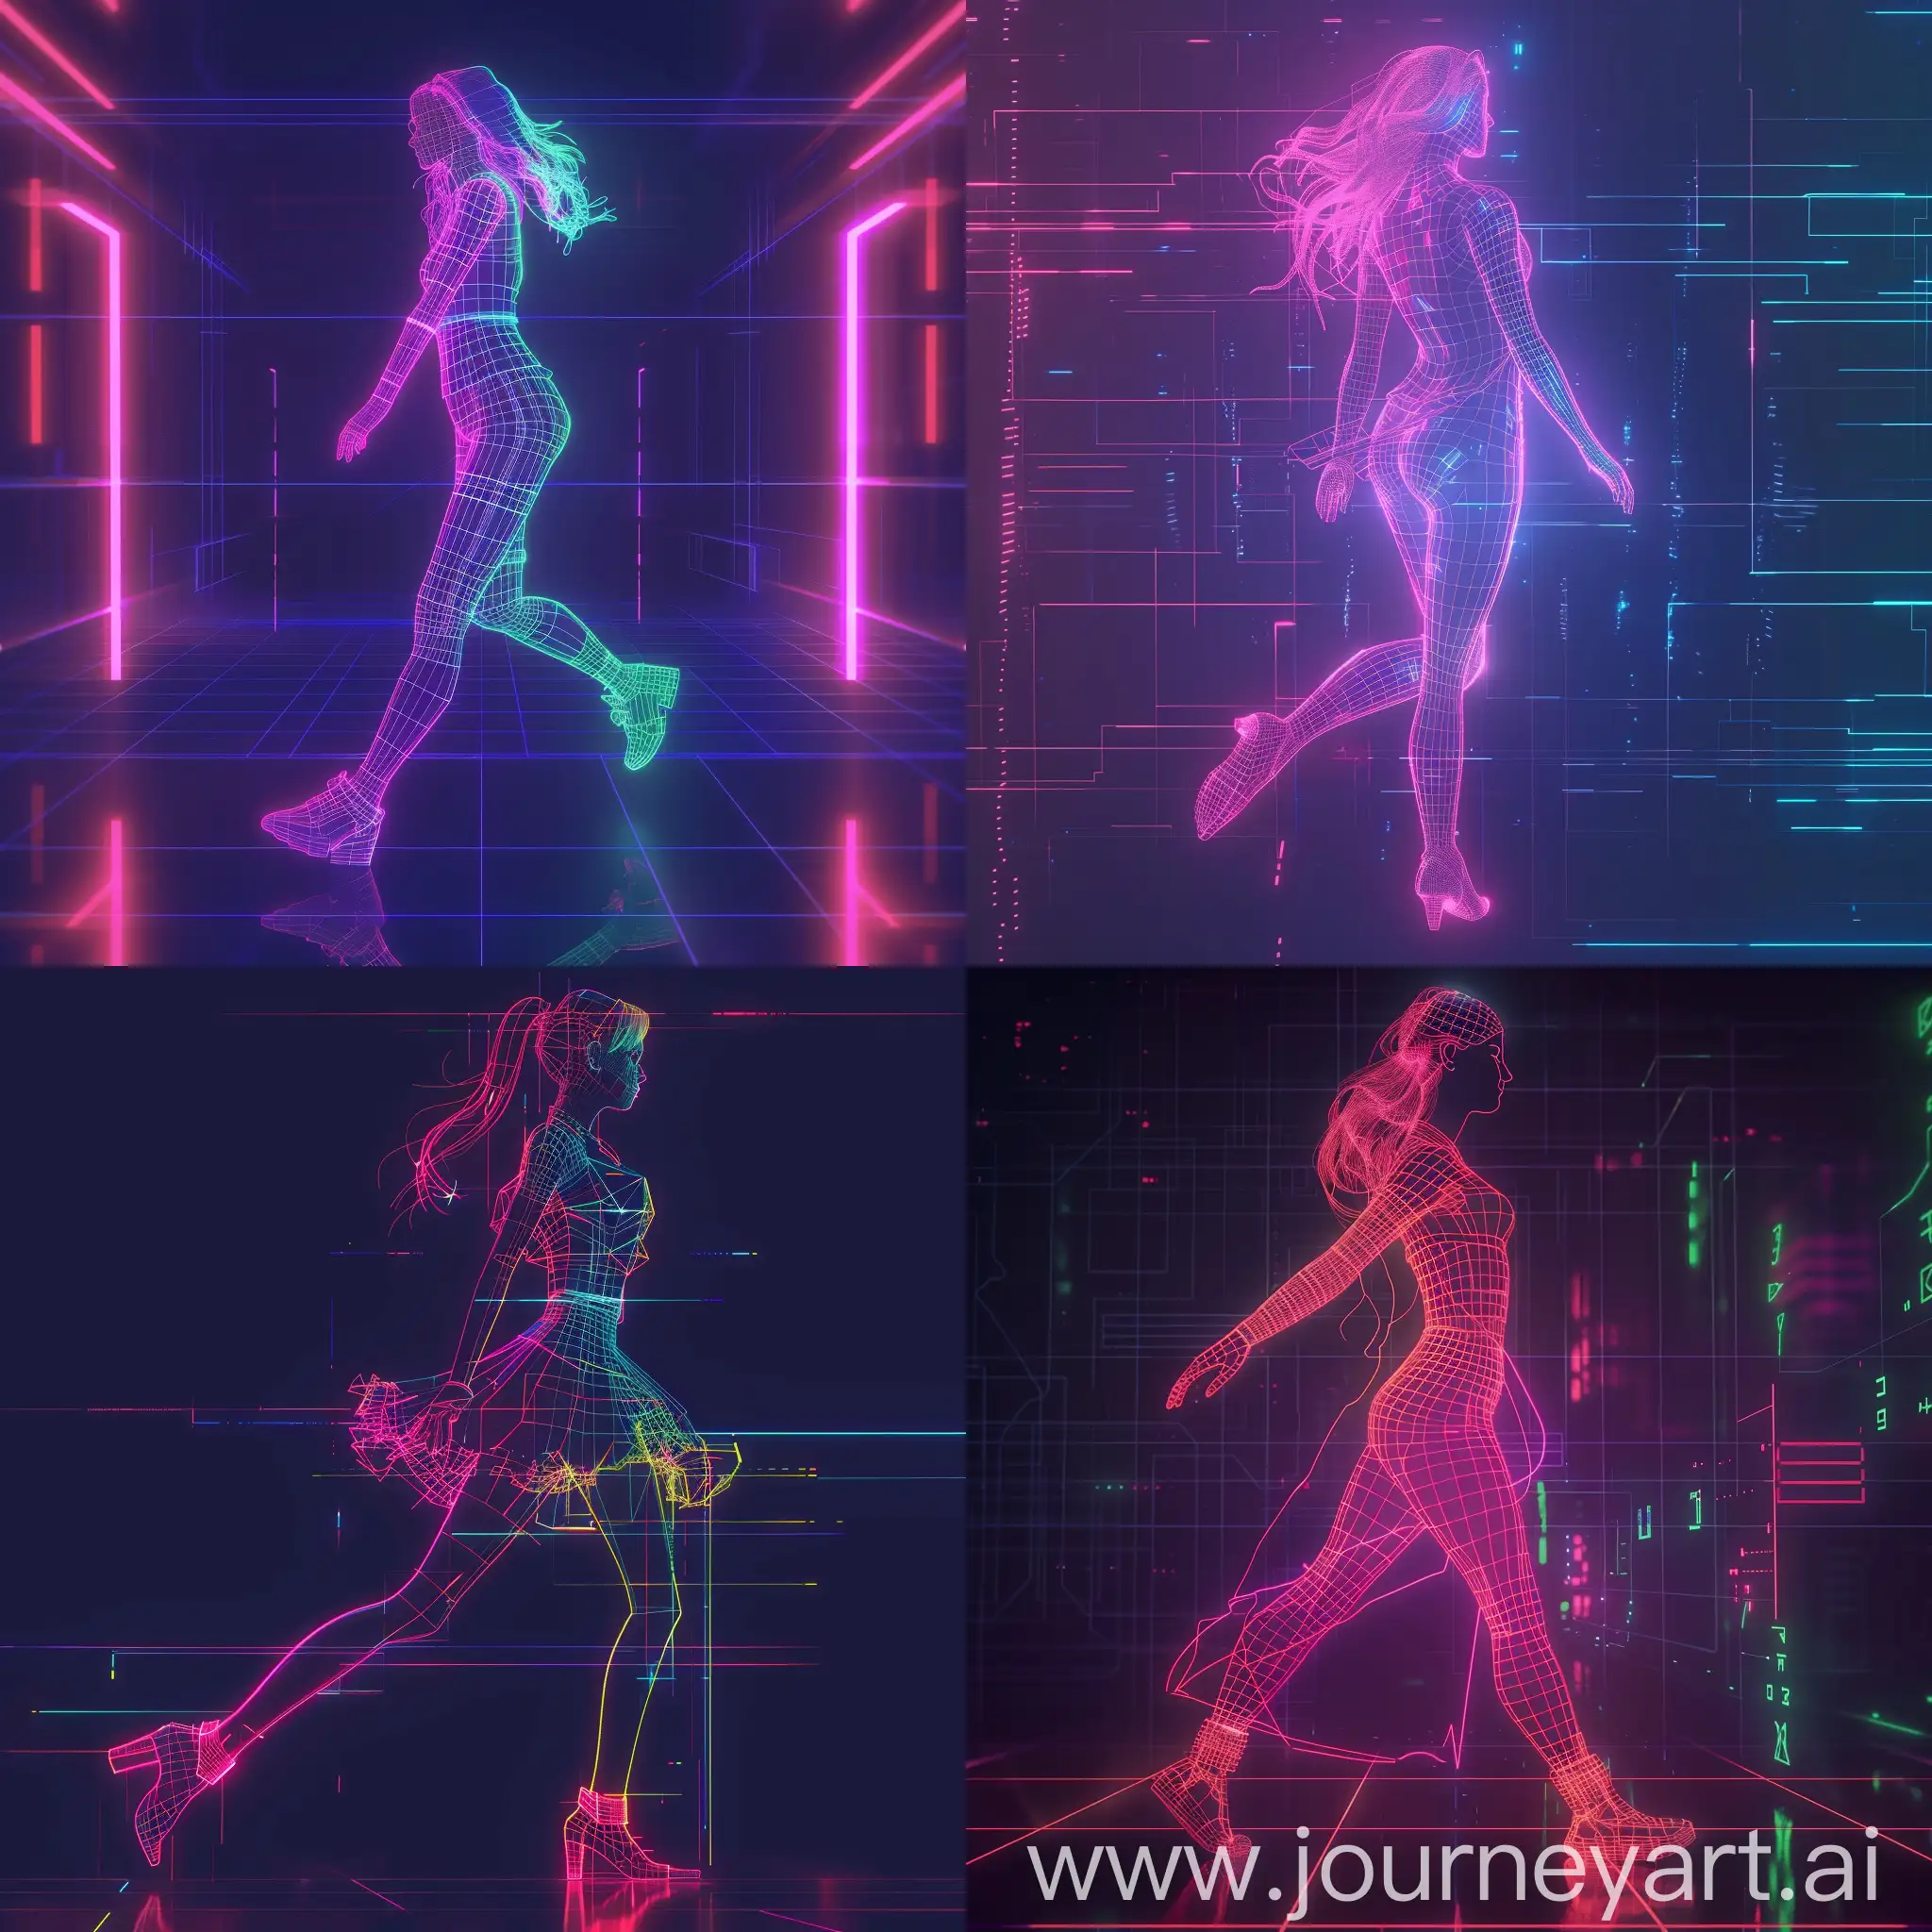 Wireframe Artwork - "Digital Neon Silhouette": Style/Artist: Piet Mondrian's abstract art, Gmunk's wireframe designs. Tags: 3D Render, Dynamic Motion, Vibrant, Conceptual. Prompt: Design a Alluring Woman in Dynamic Motion in Neon wireframe, with details akin to a digital blueprint. The scene should radiate with neon colors against a dark background, incorporating Mondrian's geometric precision and Gmunk's digital aesthetics. Highlight the intersection of technology and Female Allure., dark fantasy, 3d render, illustration, vibrant, architecture, cinematic